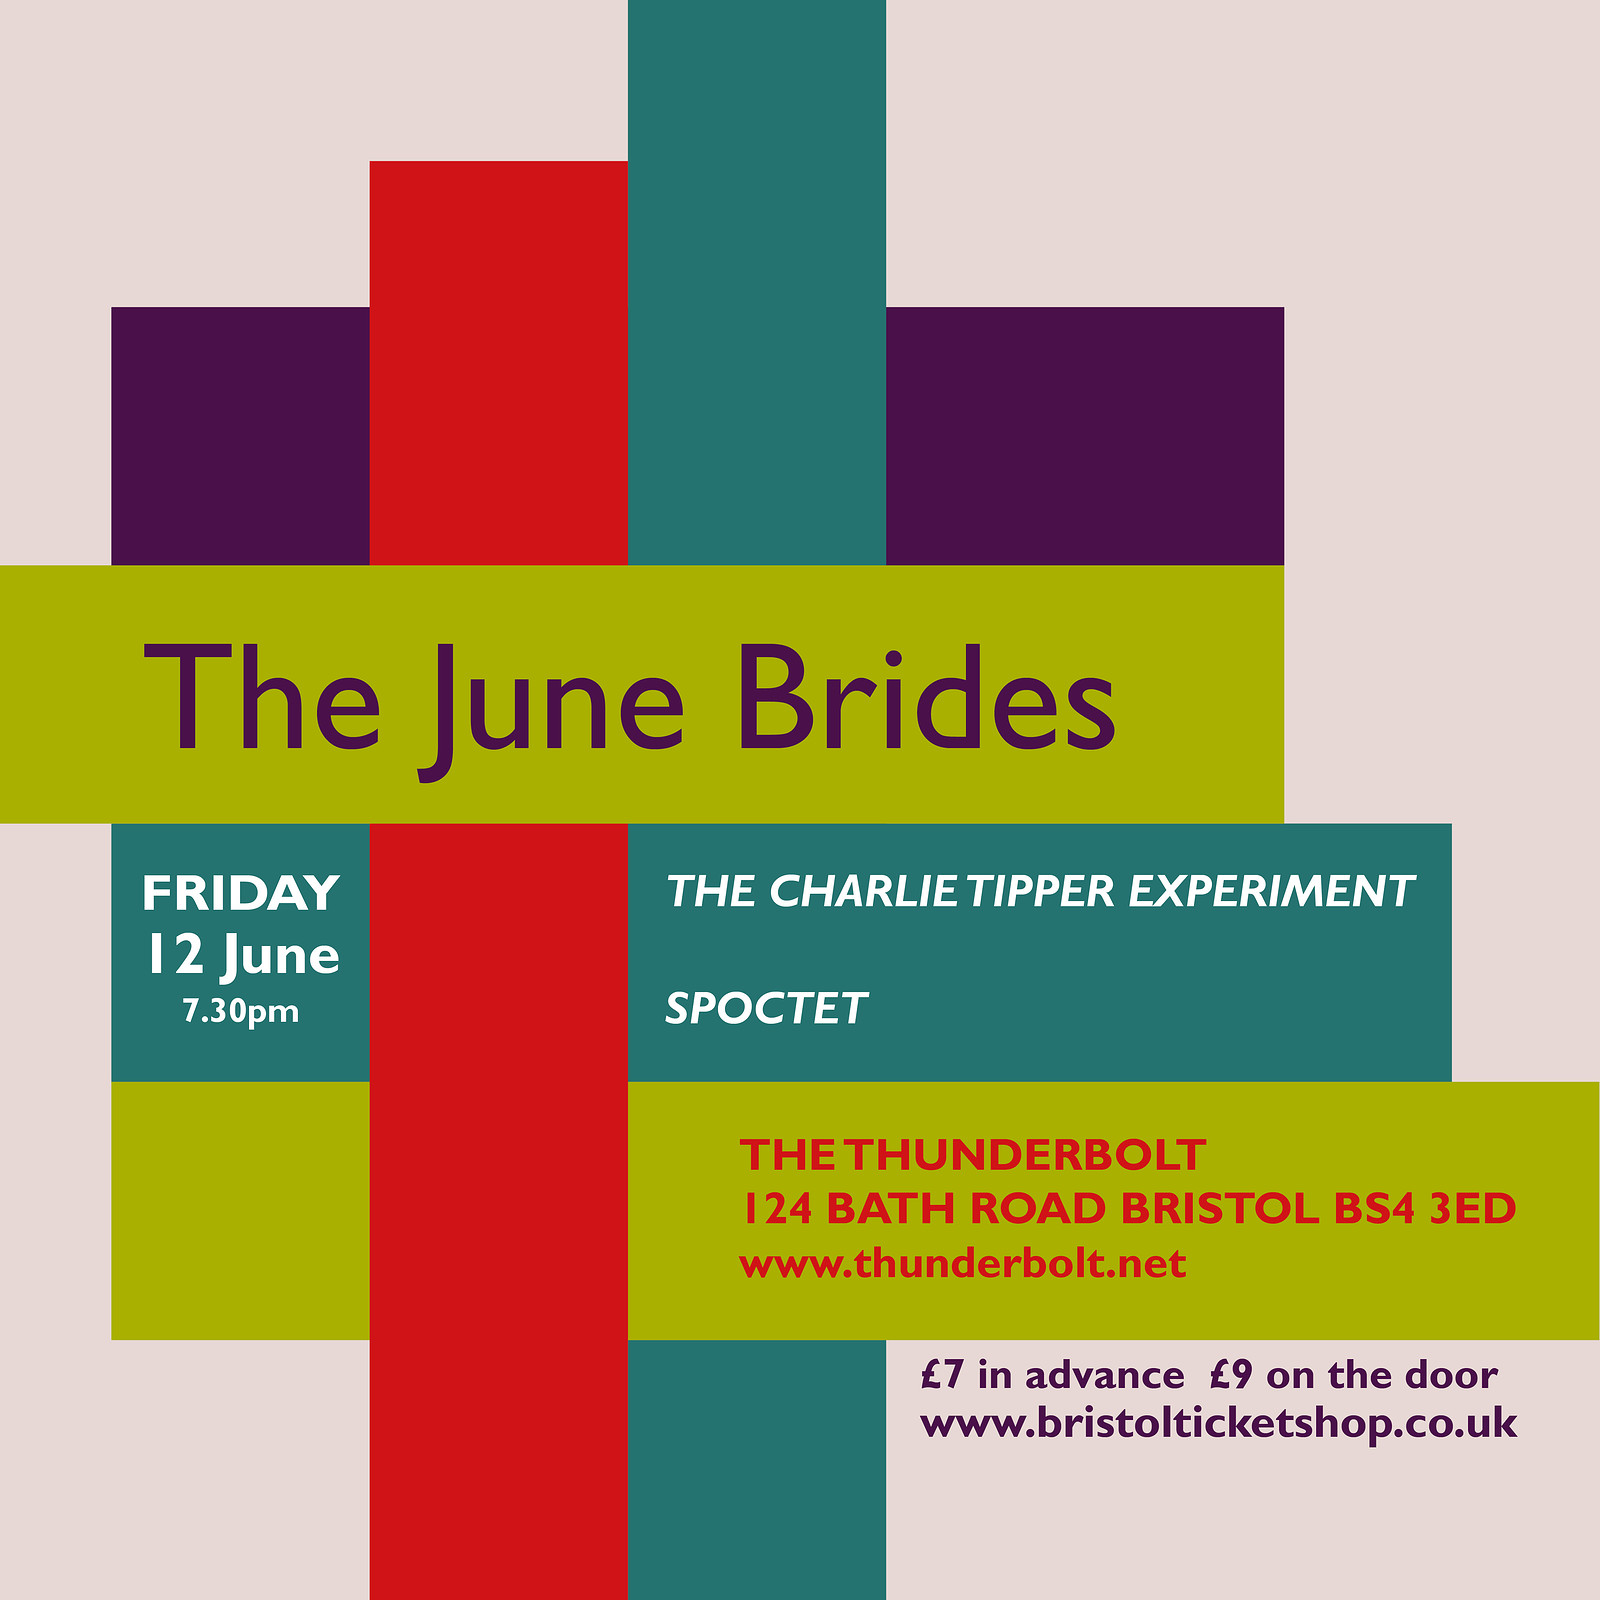 The June Brides at The Thunderbolt